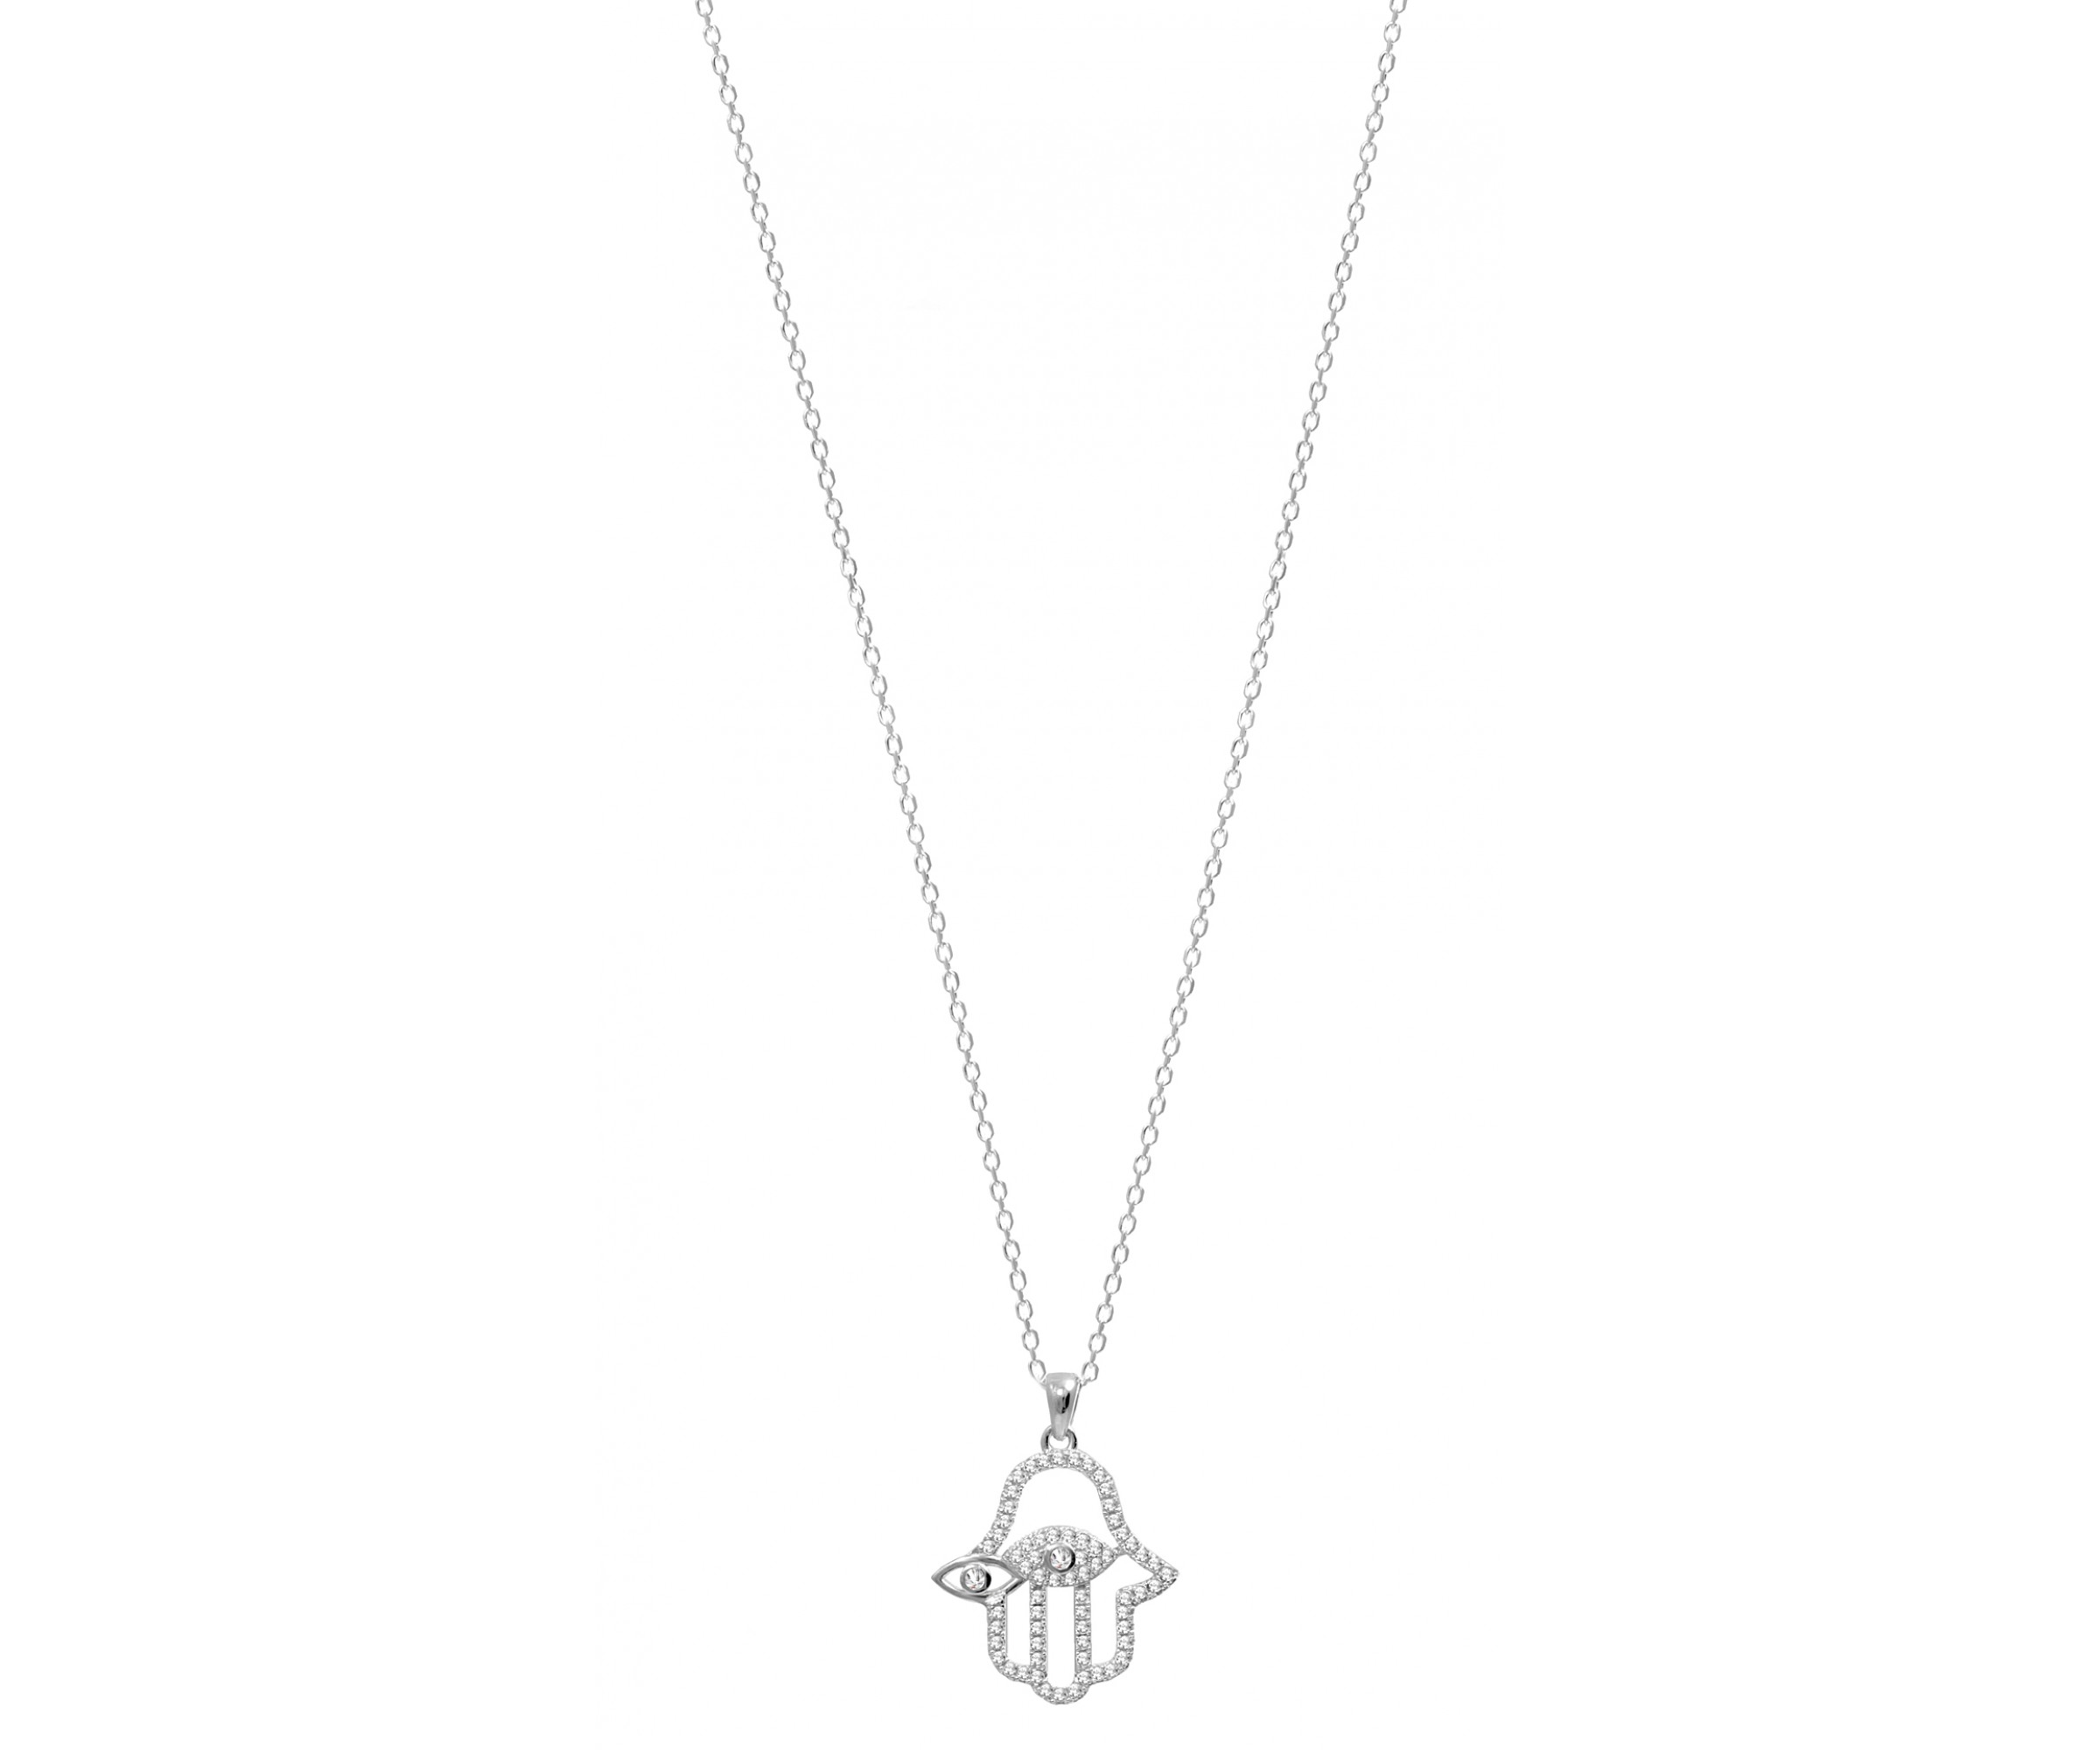 Buy Hand Necklace with Cz Stone in Hamsa Necklaces